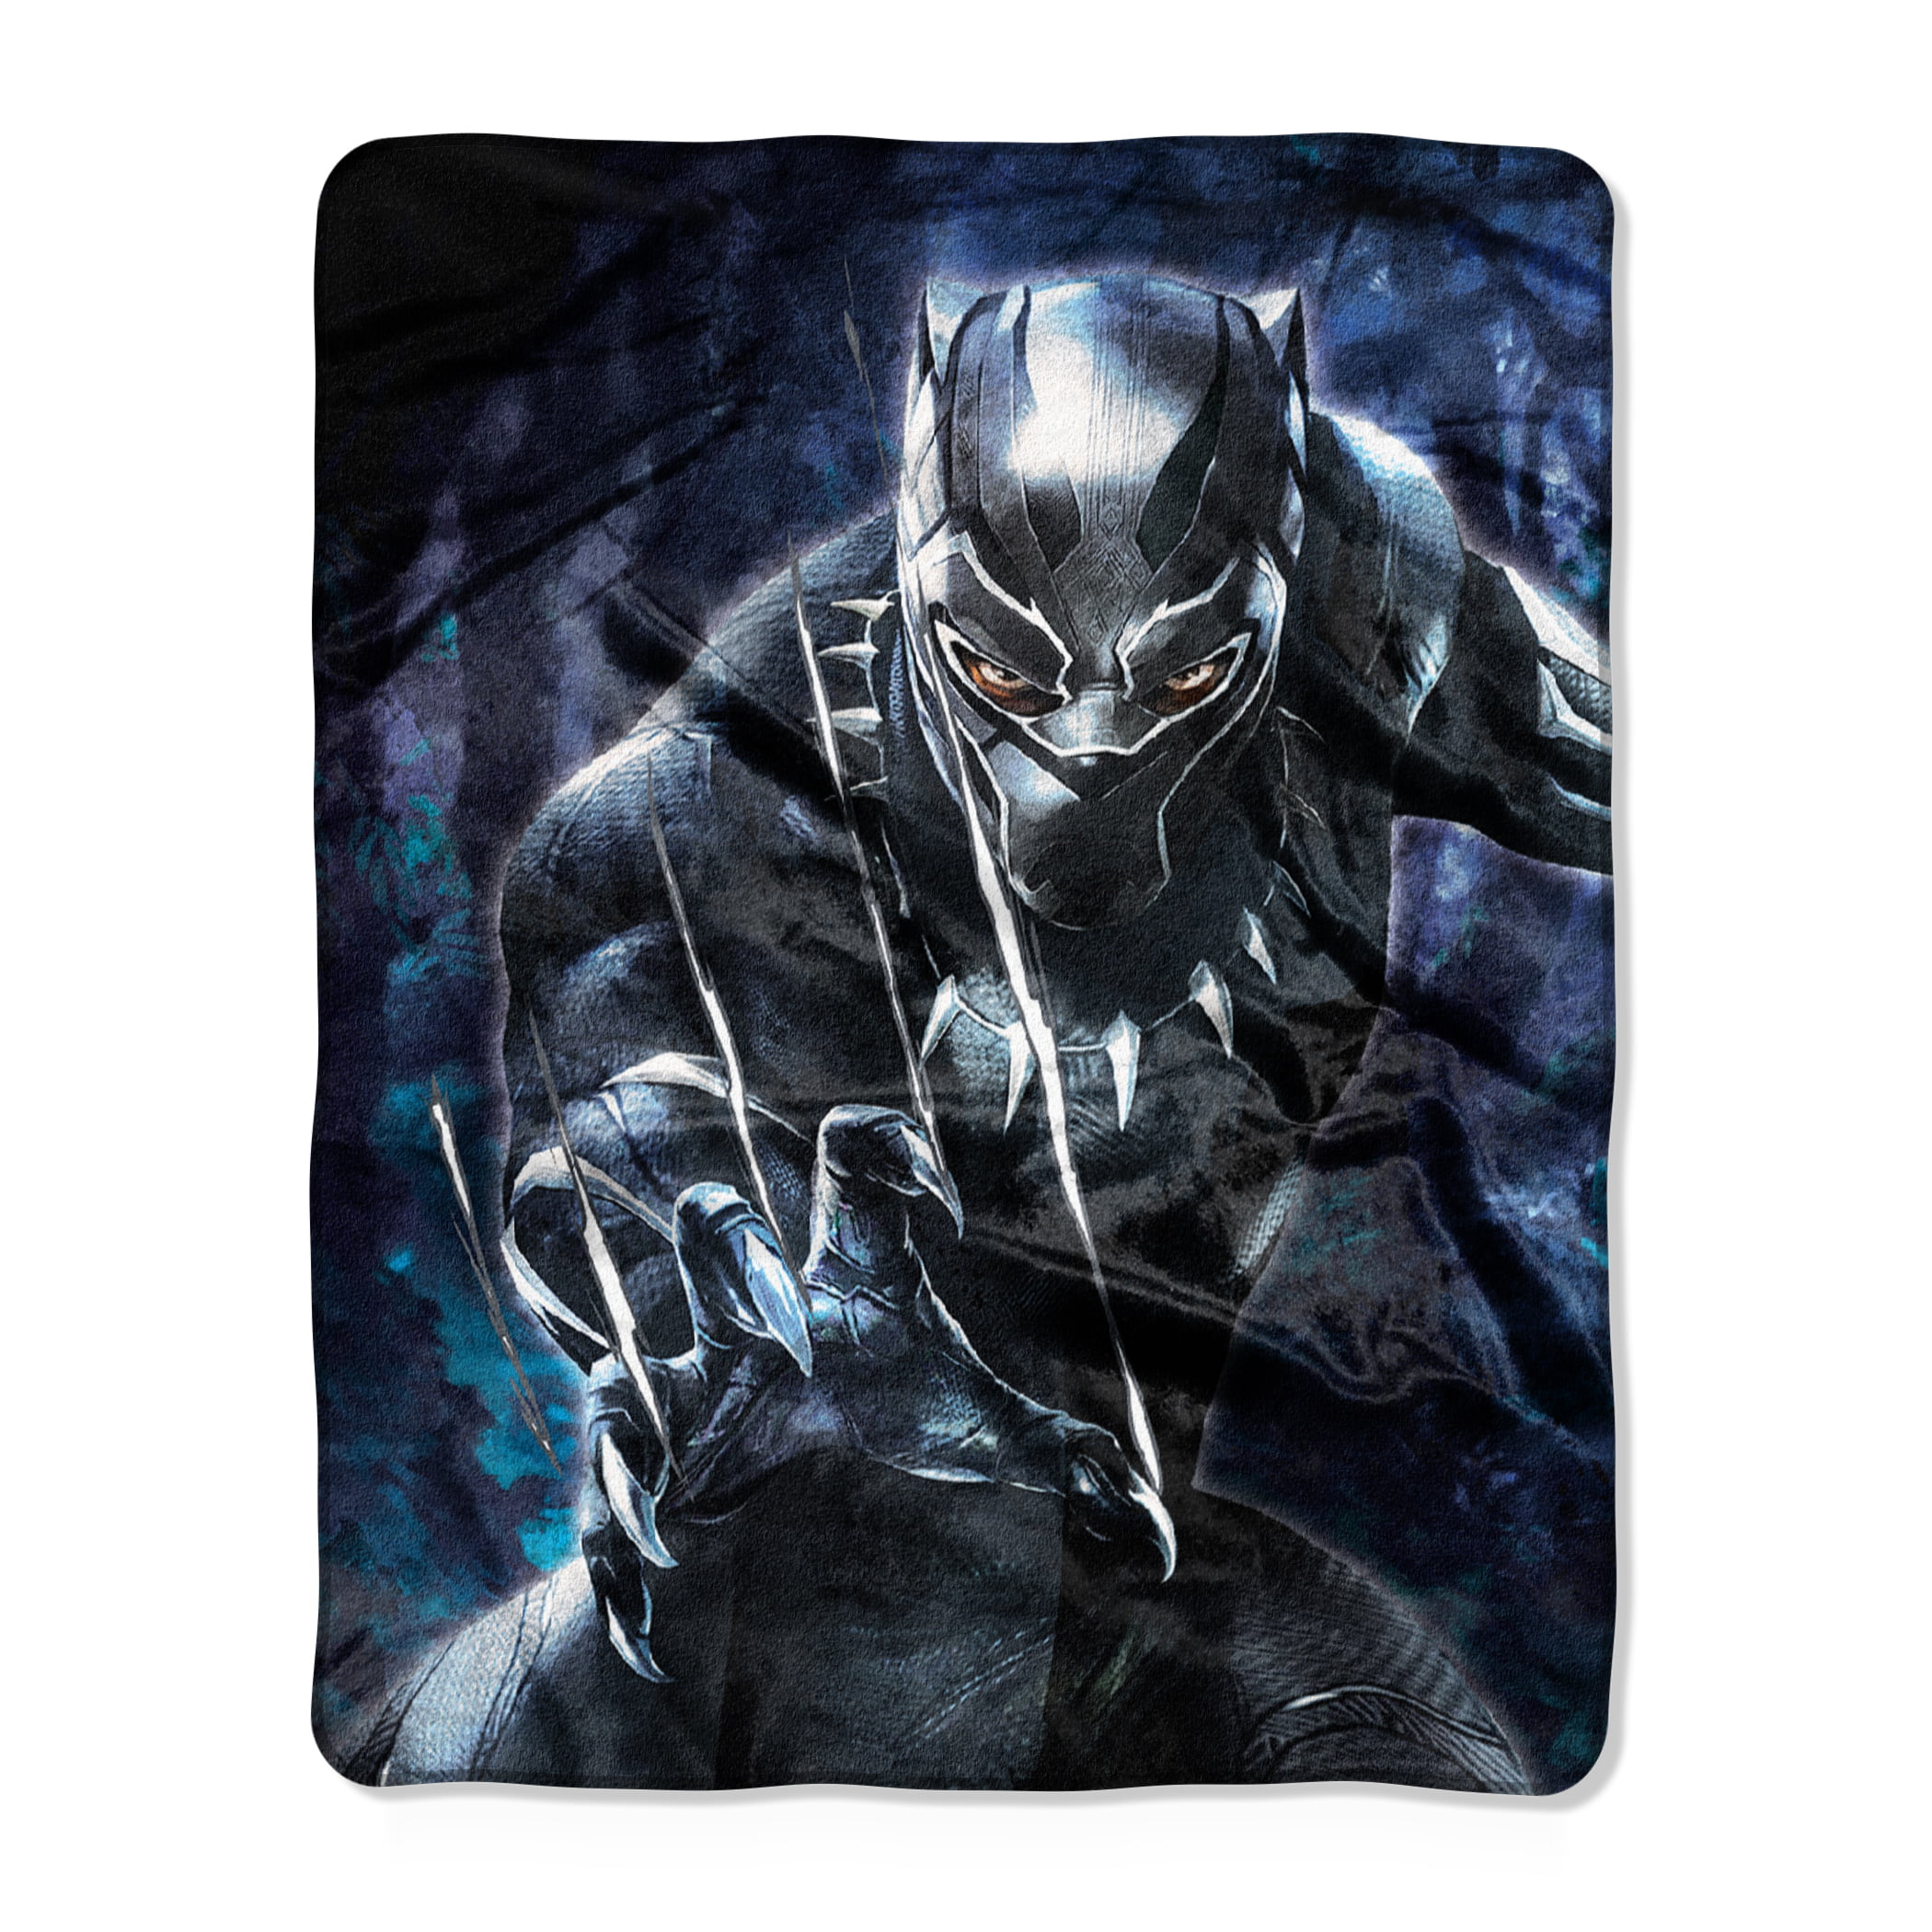 Marvel Black Panther Silky Soft Throw 40"x50" Soft & Cuddly Black Claws Blanket 